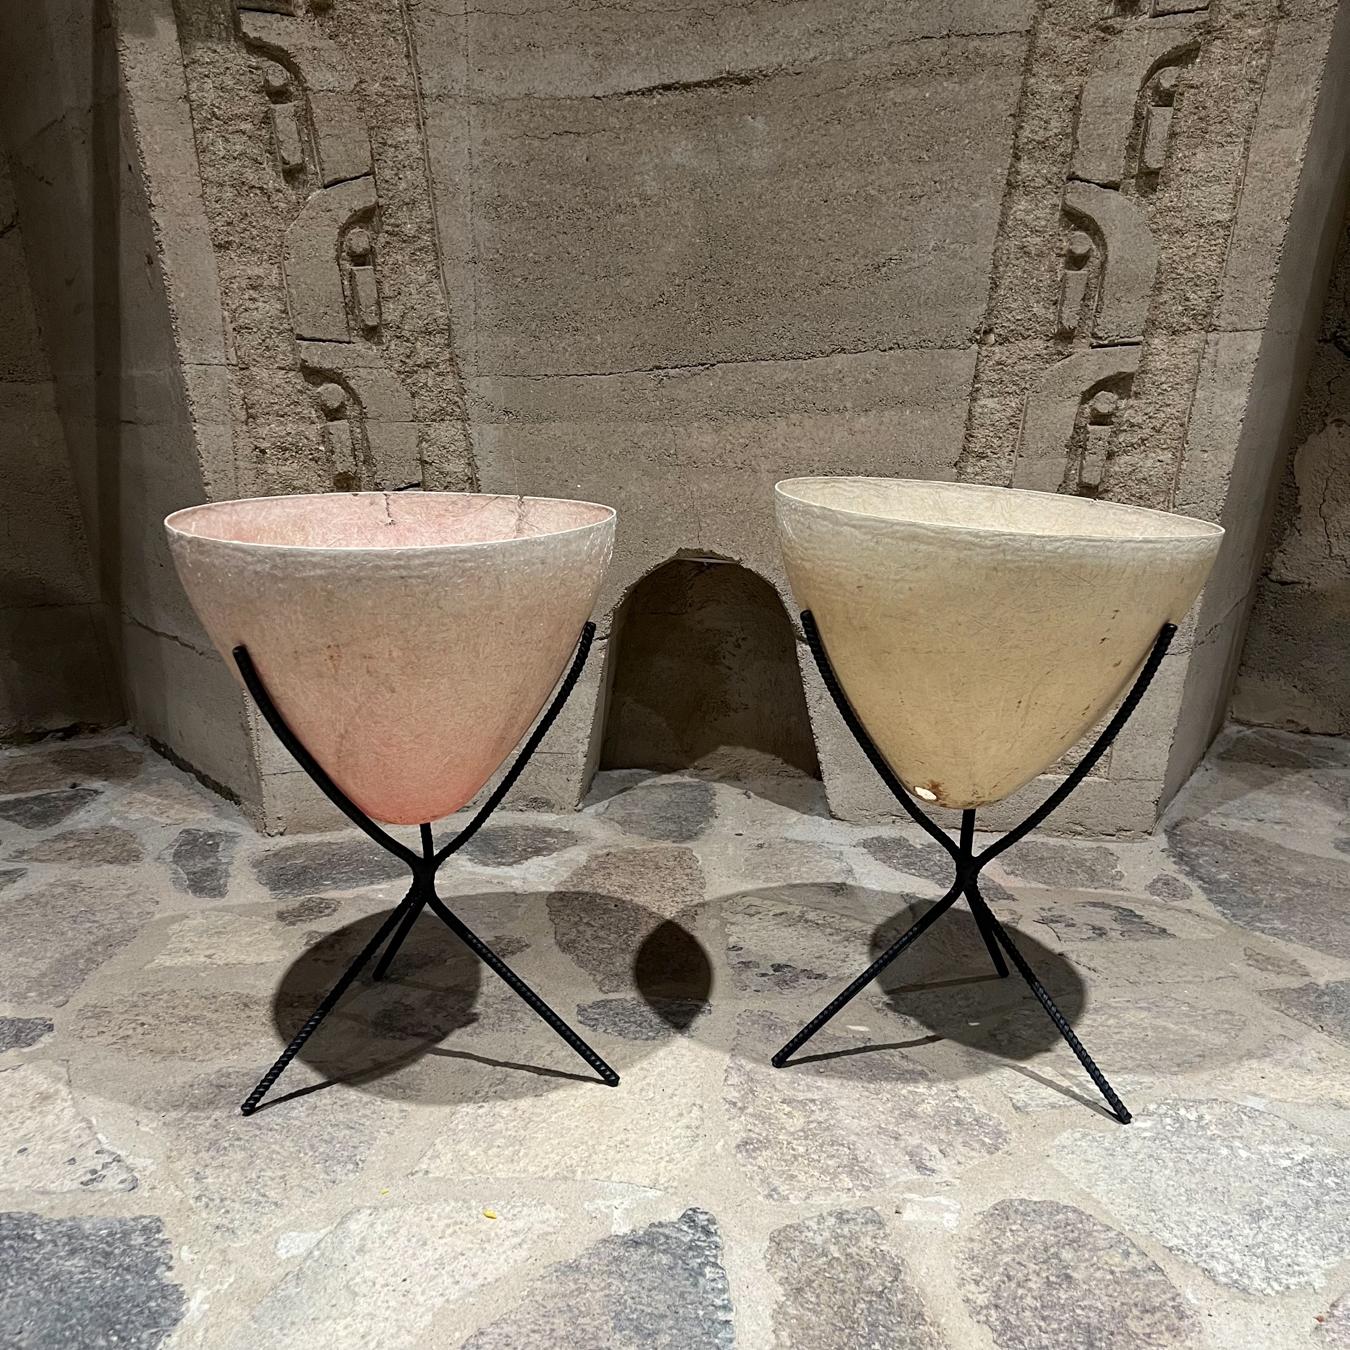 1950s Modern Kimball fiberglass bullet cone planter set 
Listing is for 2 vintage planters with base.
20 tall x 15.25 diameter
Fiberglass in original vintage preowned condition. Distressed.
Sun faded cracks and holes. Not new.
No label.
Wear &